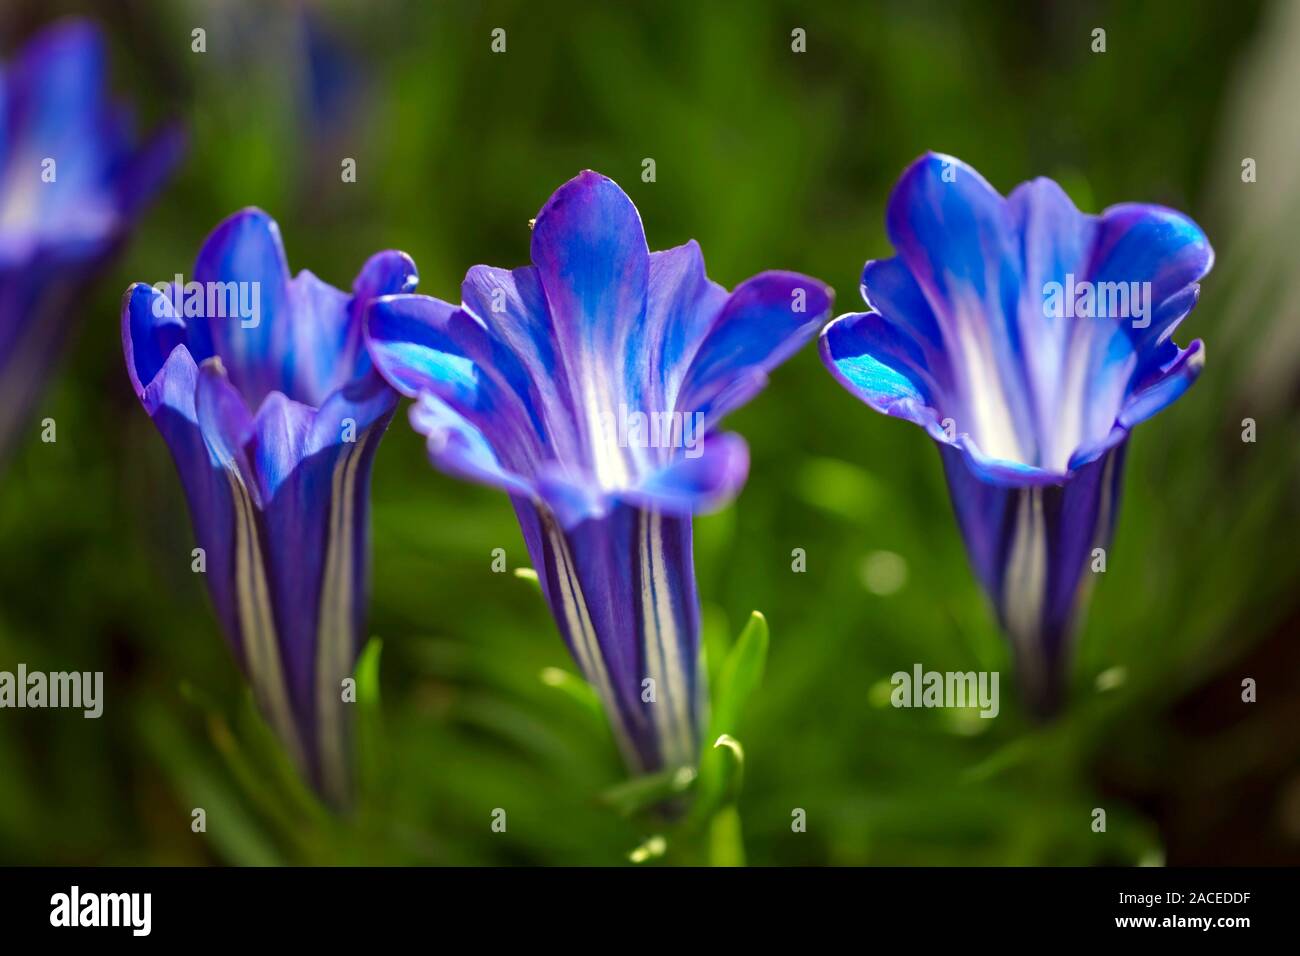 Chinese gentian flowers (Gentiana sino-ornata 'Blue Sky'). This plant is native to China and Tibet. Photographed in autumn. Stock Photo